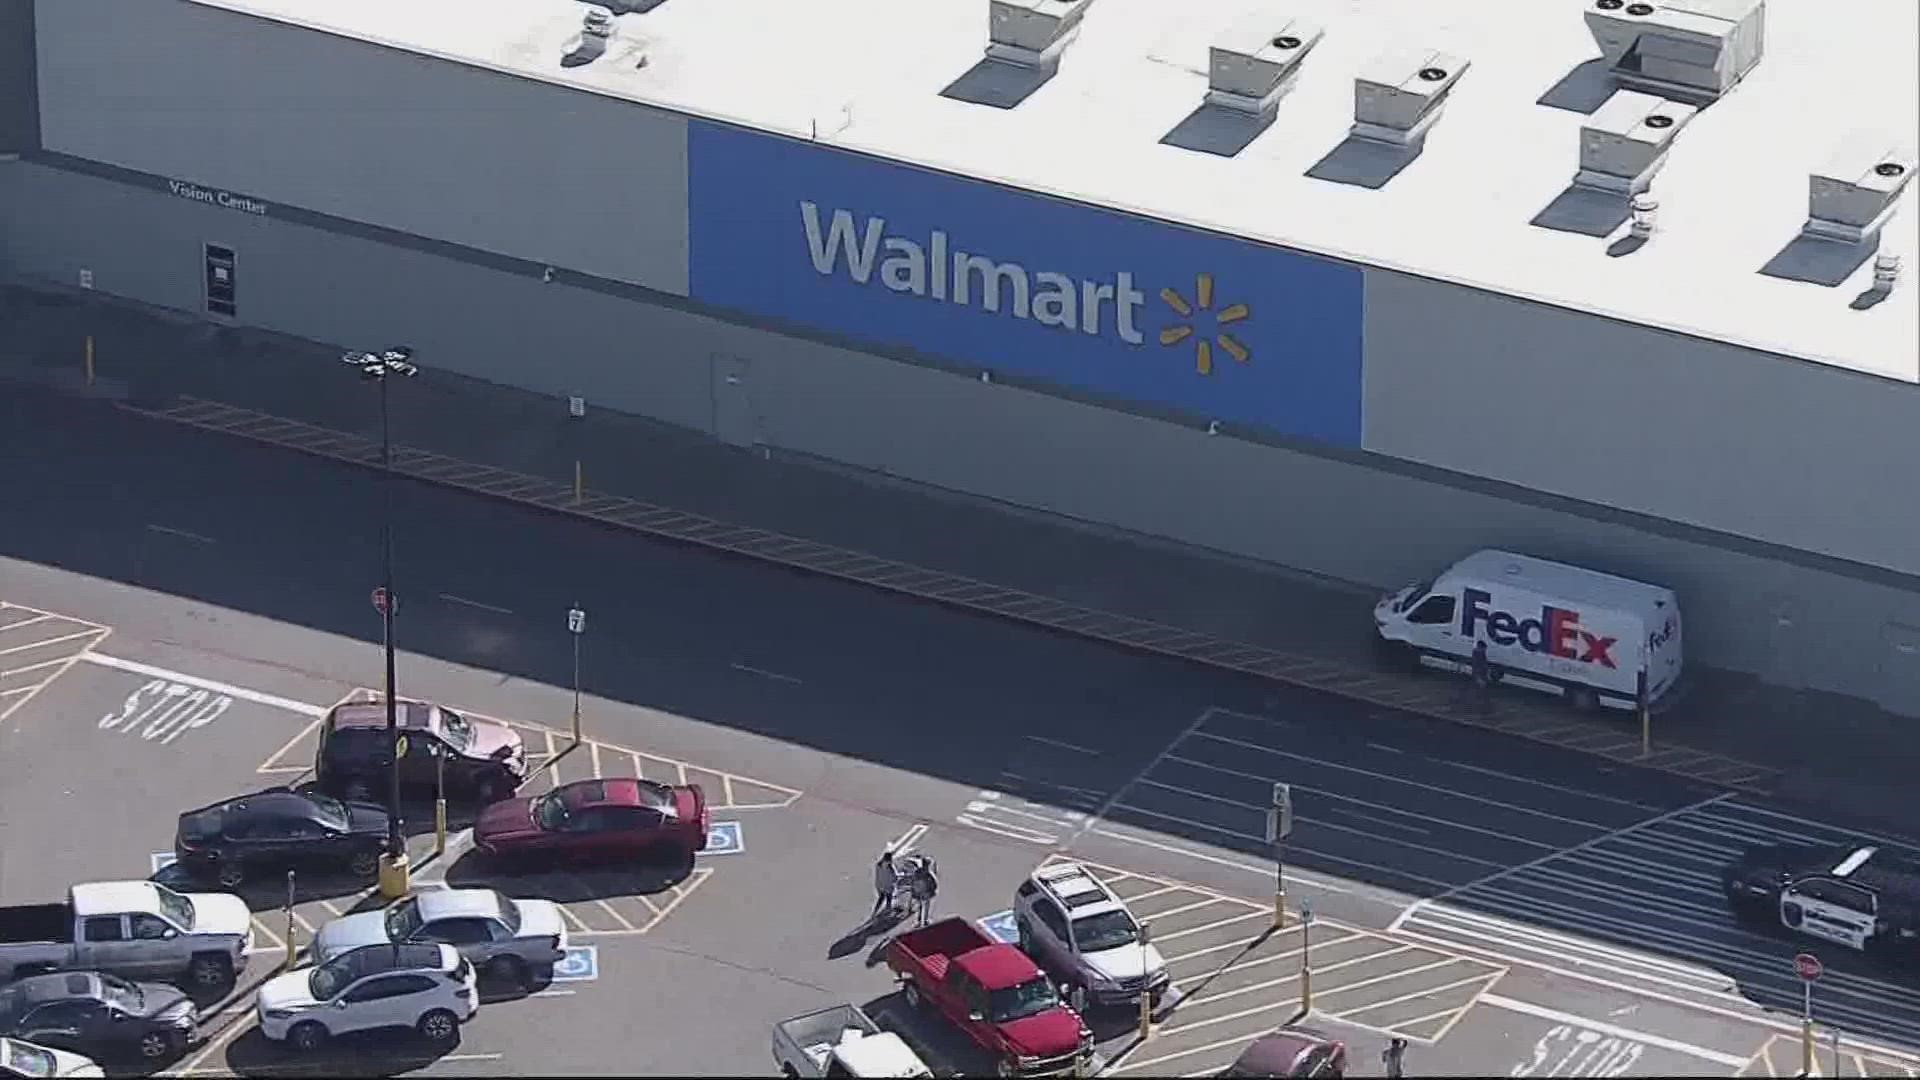 A one-year-old child accidentally shot an infant sibling and their mother at a Walmart in Granbury.